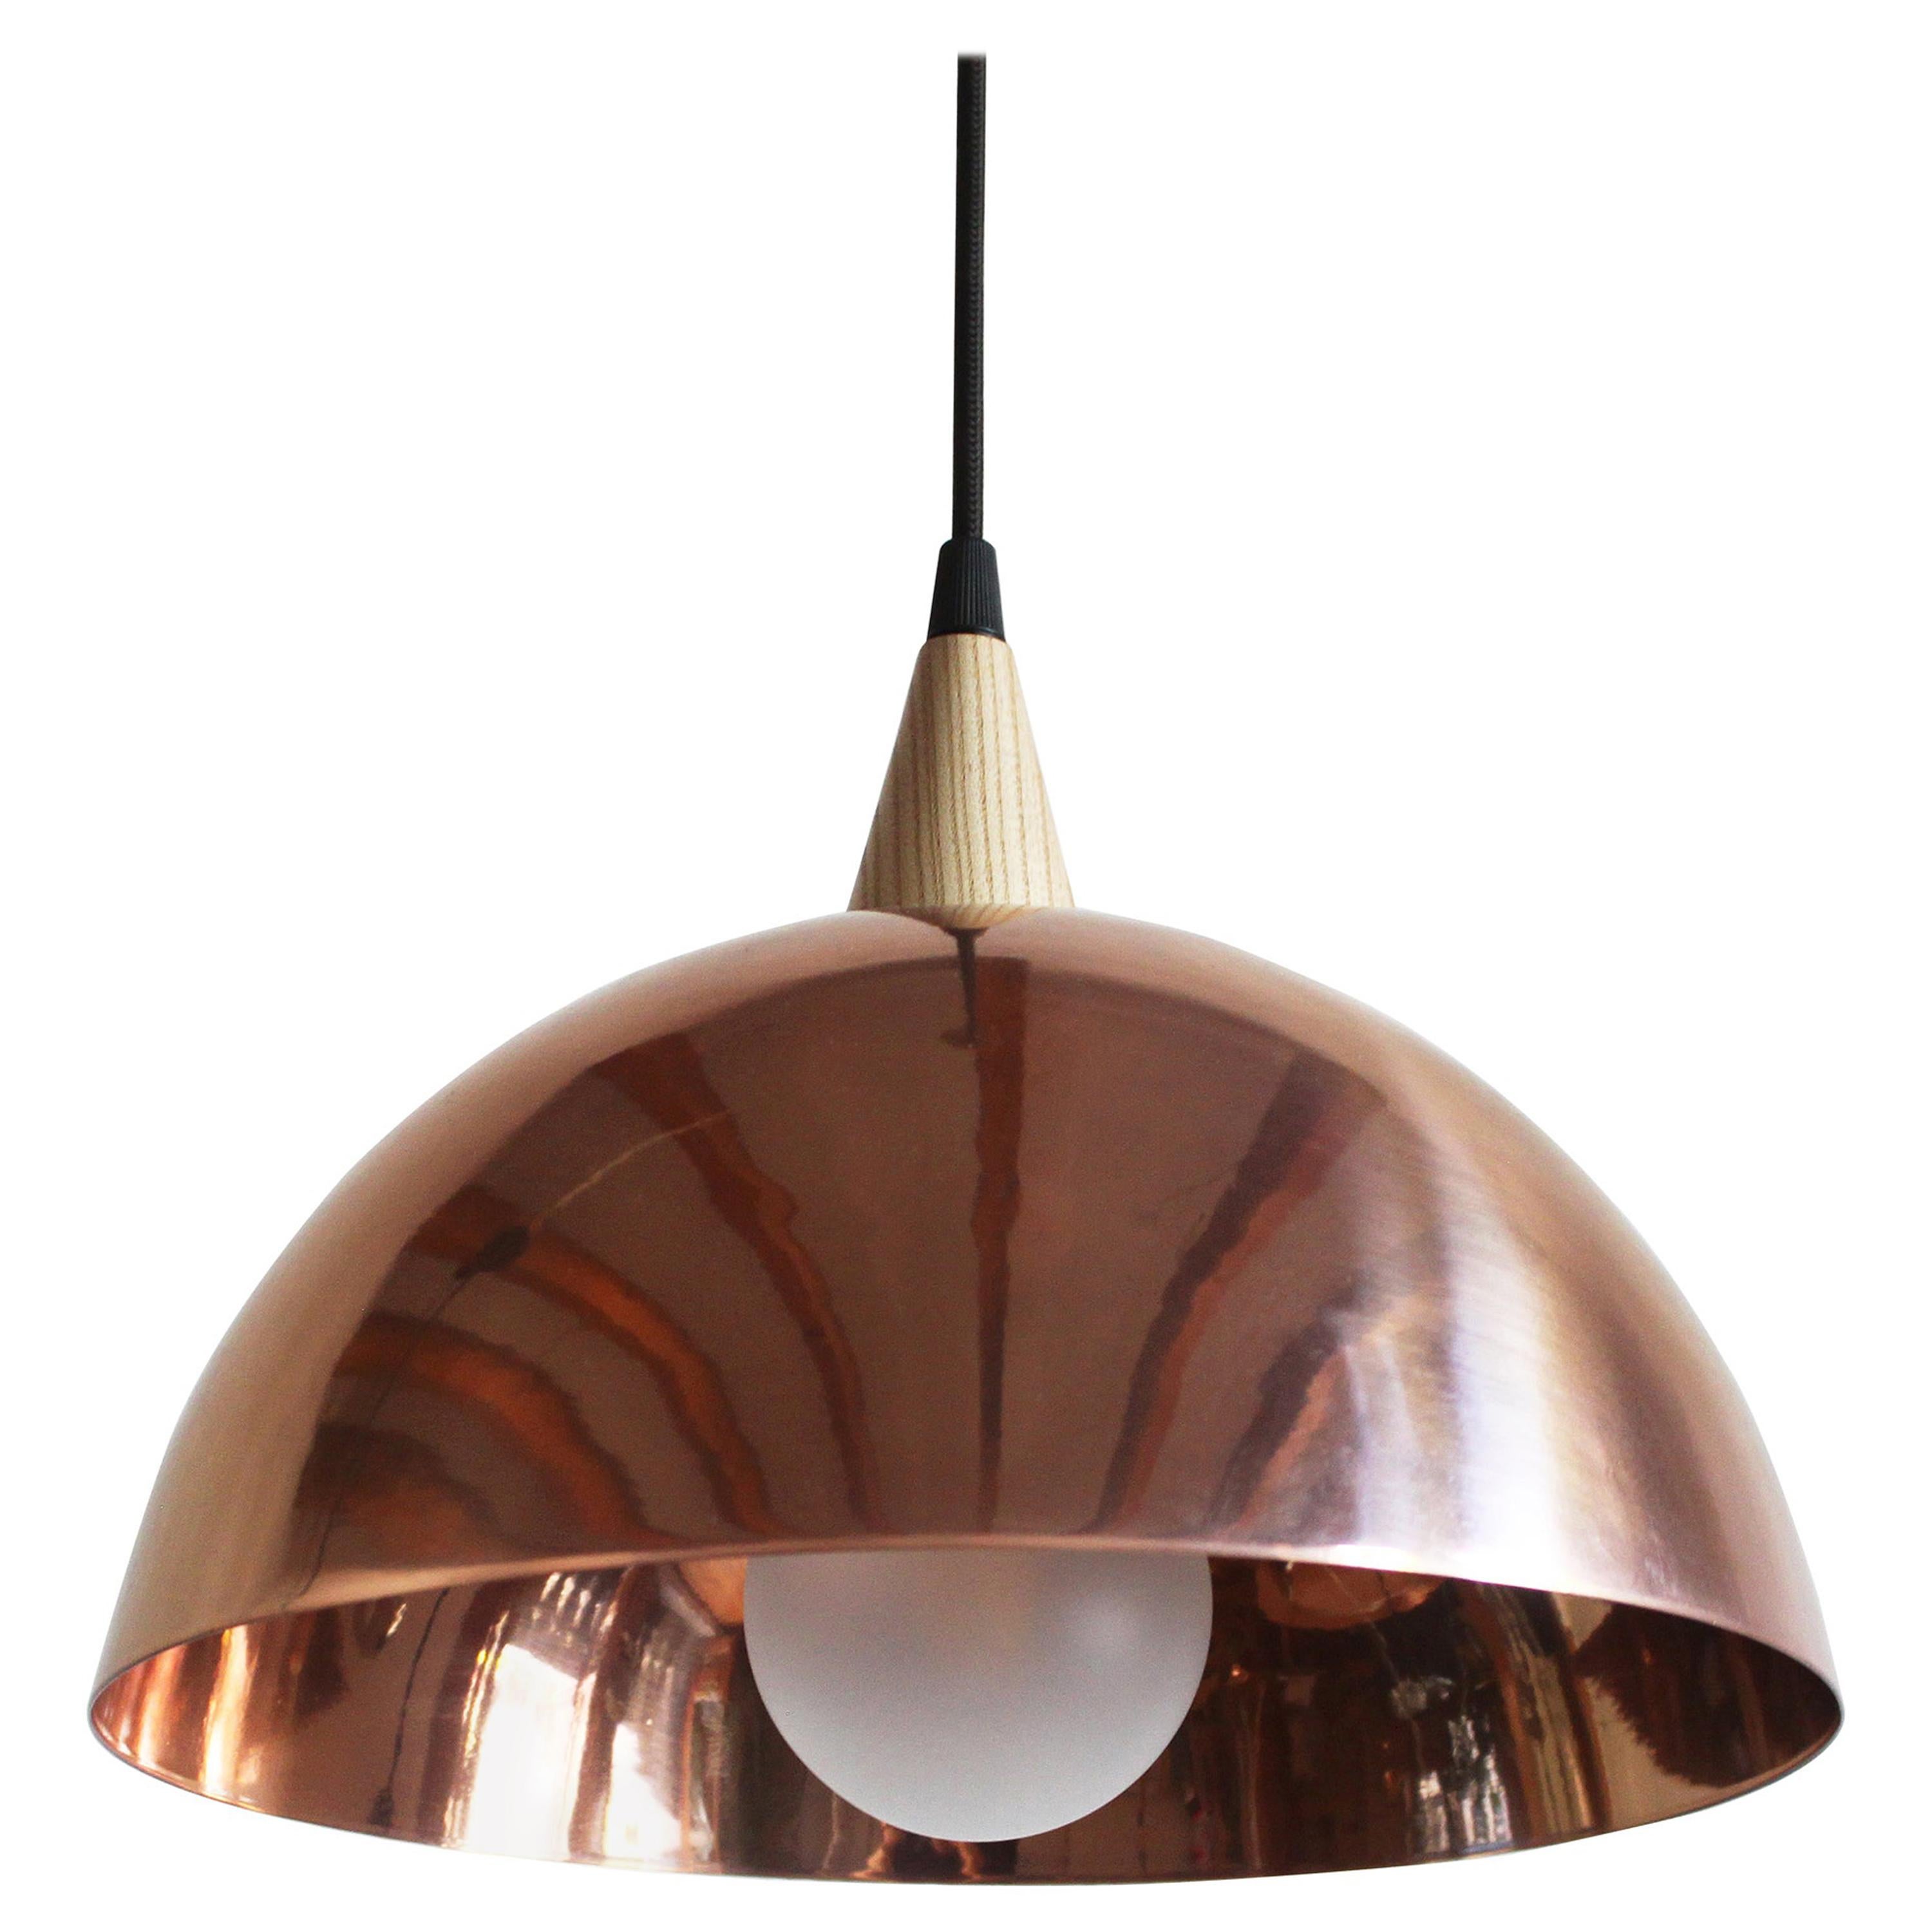 Domo Abajo 30 Pendant Lamp, Maria Beckmann, Represented by Tuleste Factory For Sale